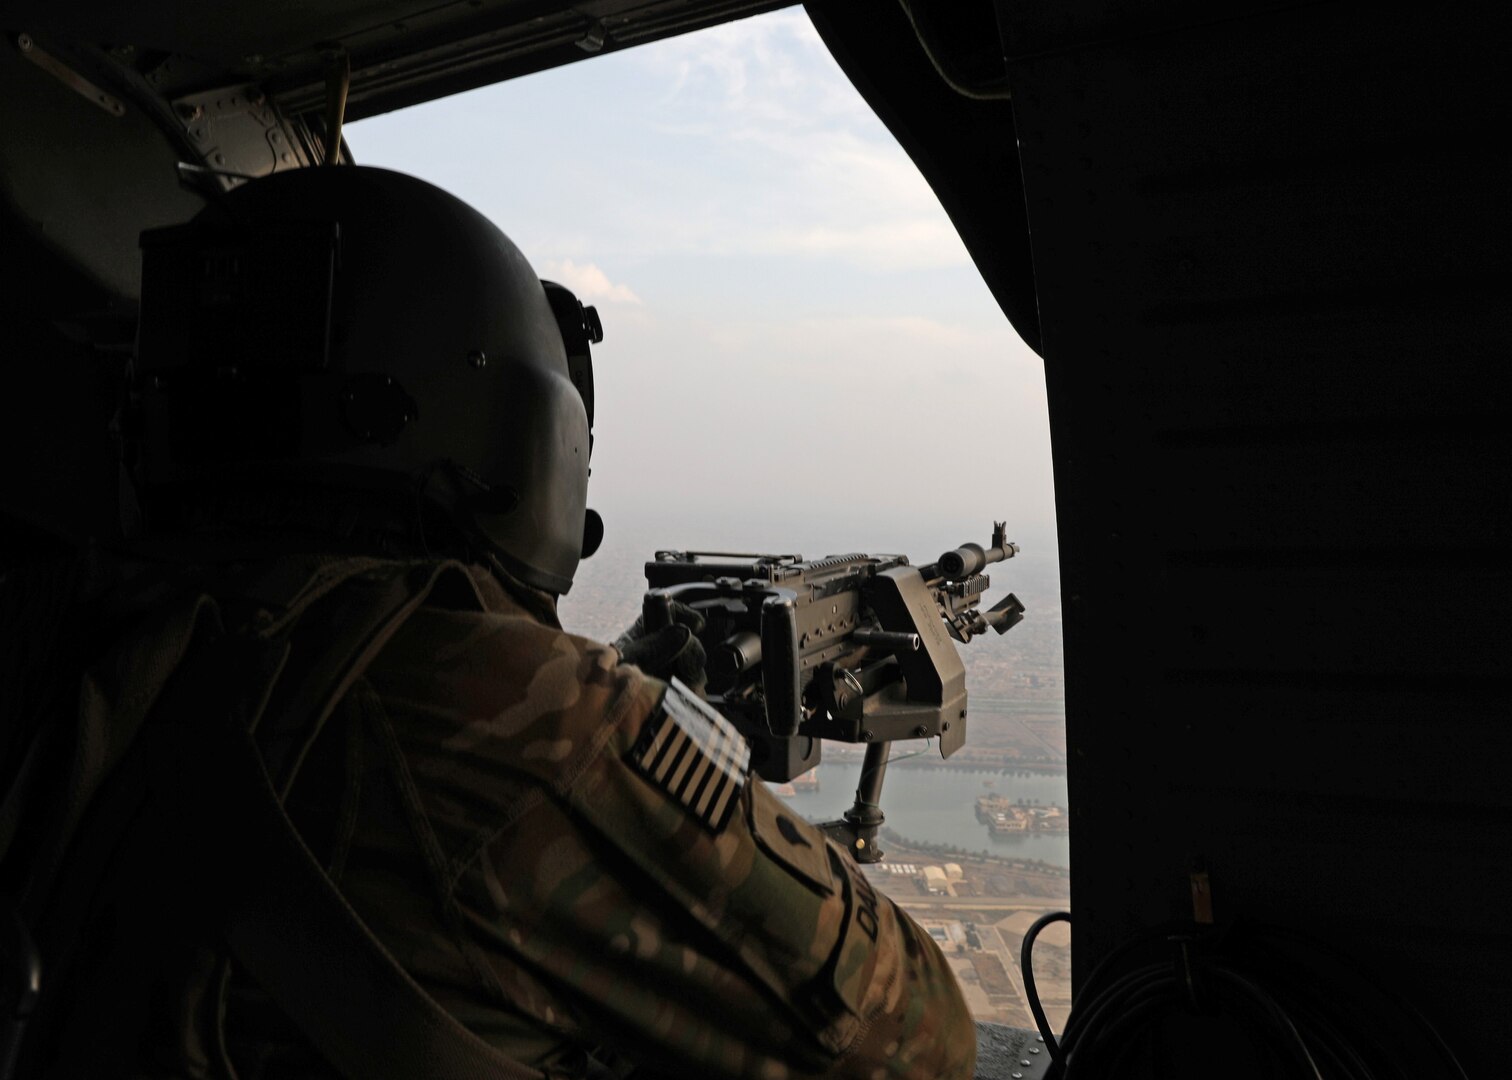 Gunner mans his post at the open door of a helicopter in flight.